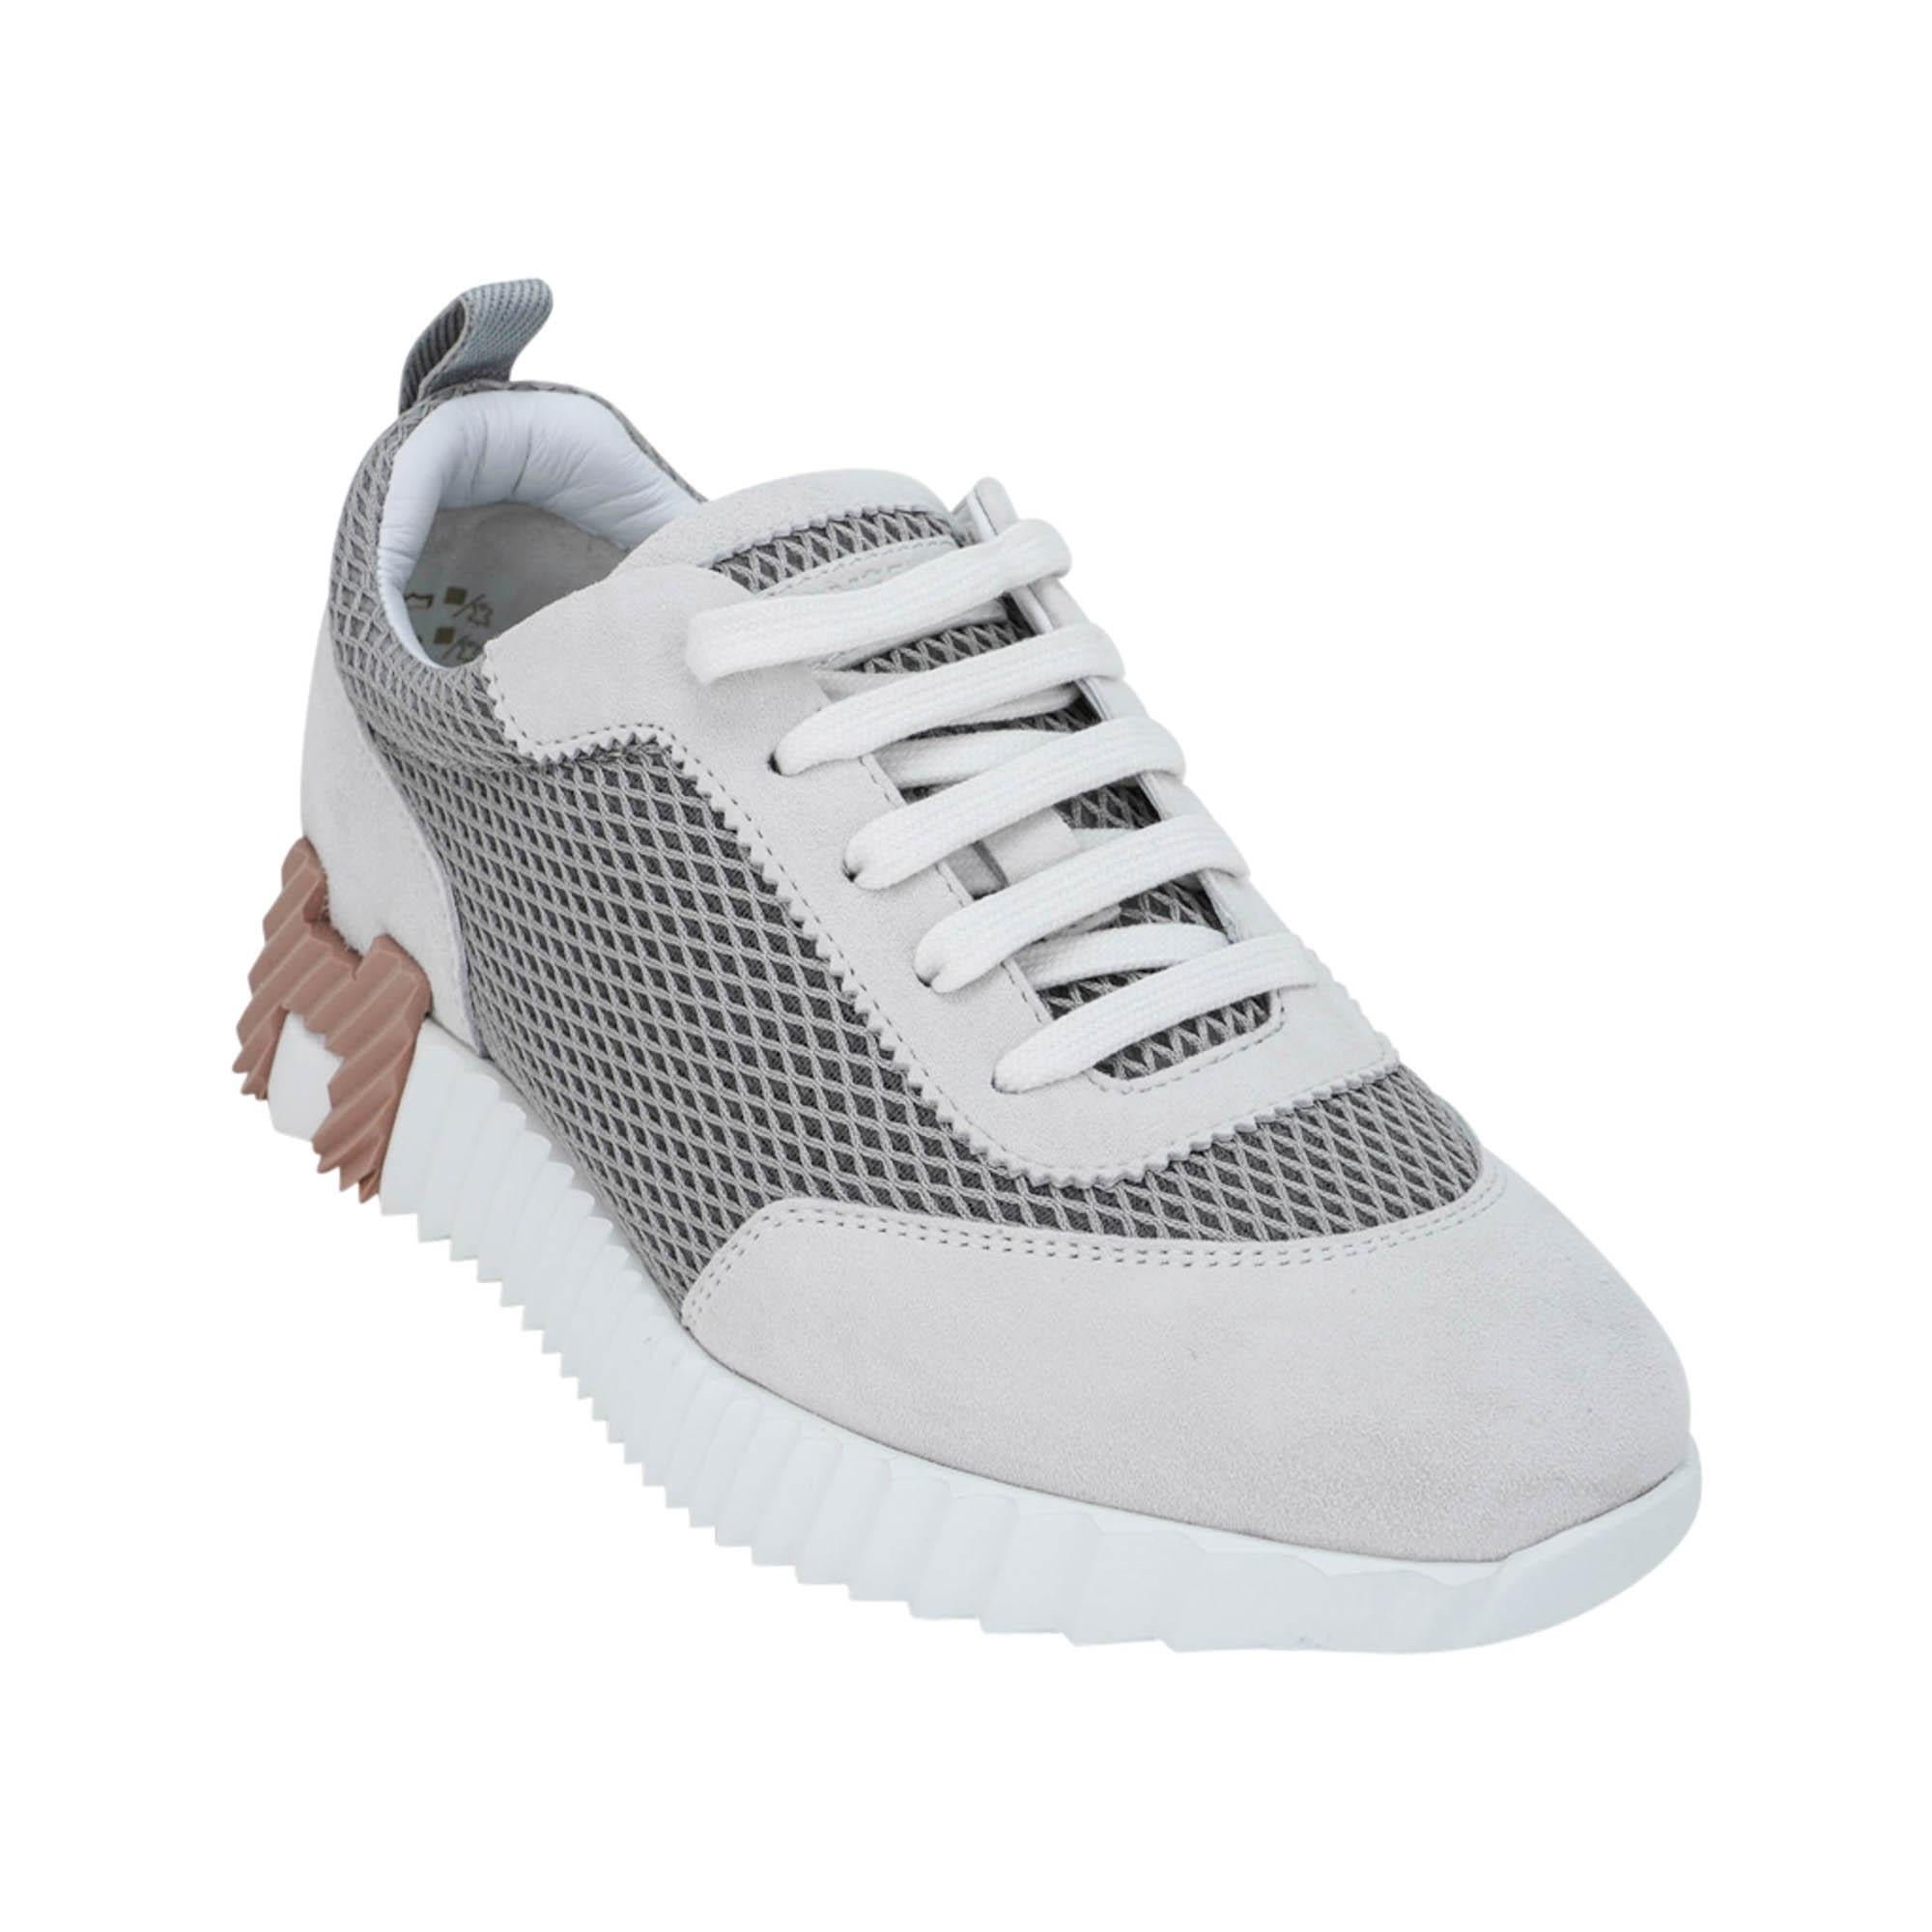 Hermes Bouncing Sneaker Gris Lulea and Blanc 37 / 7 For Sale 5